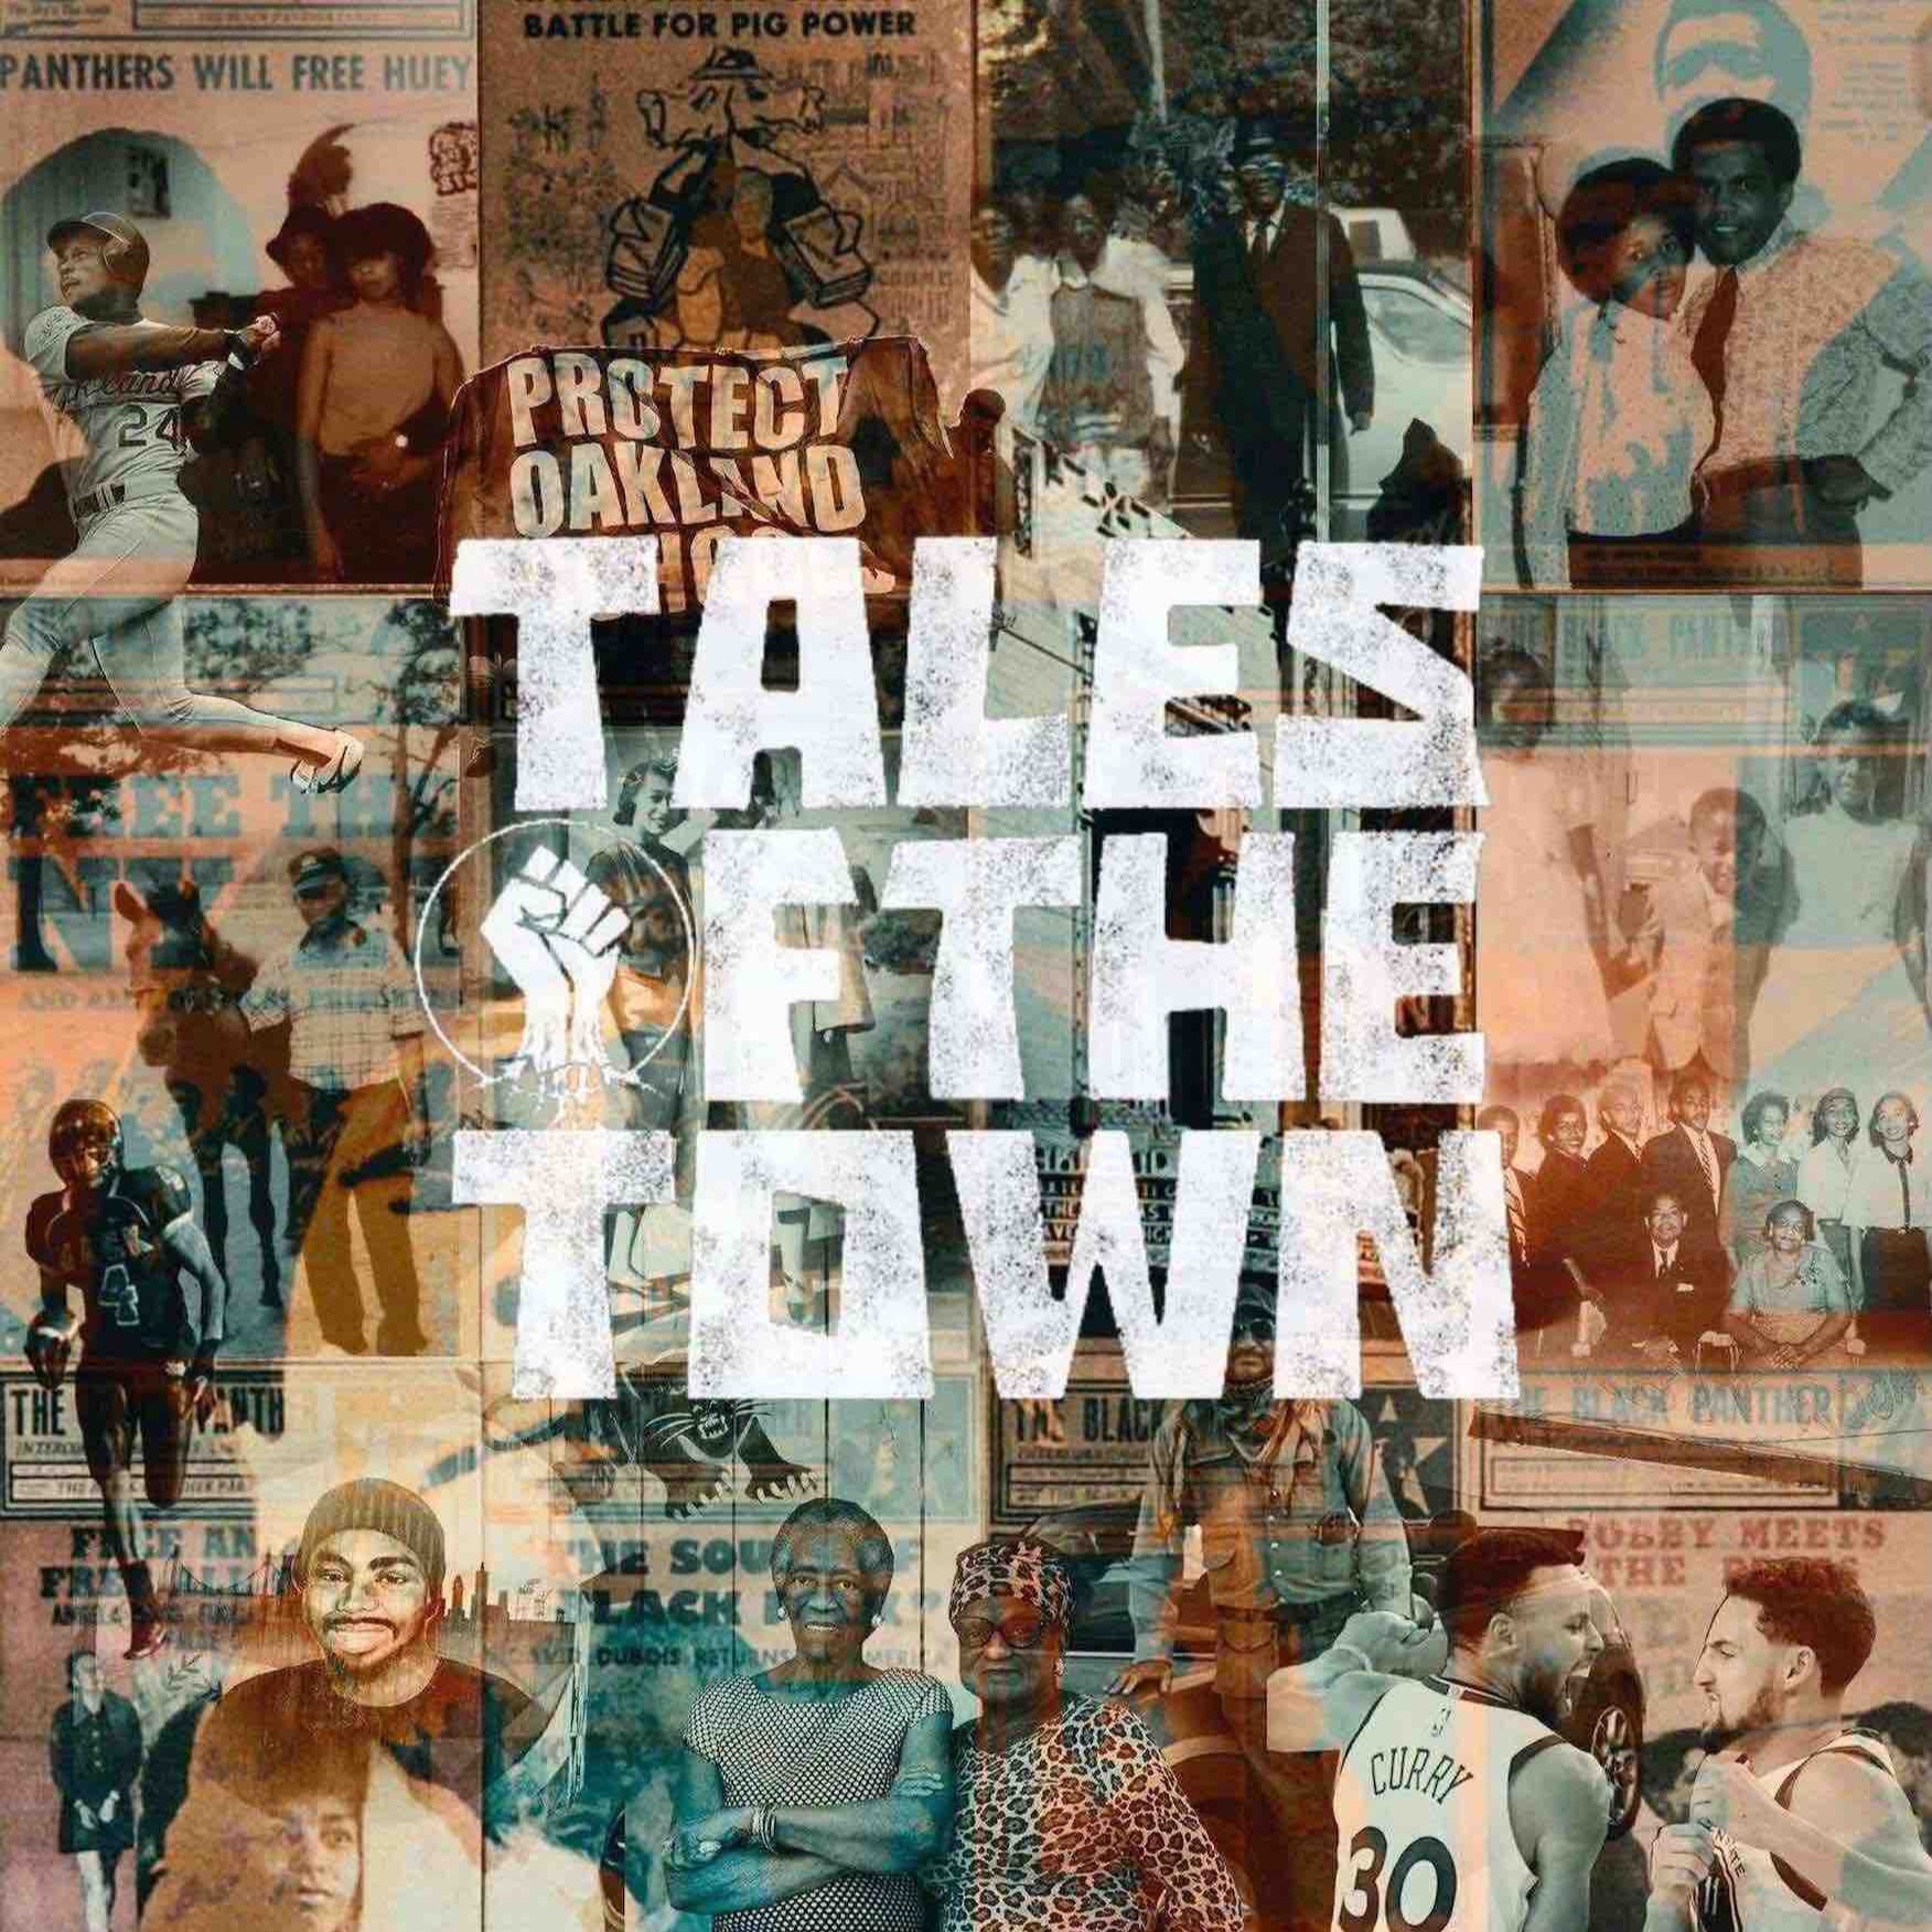 Tales of The Town E4: A Brief History of Oakland Music (Part 1)